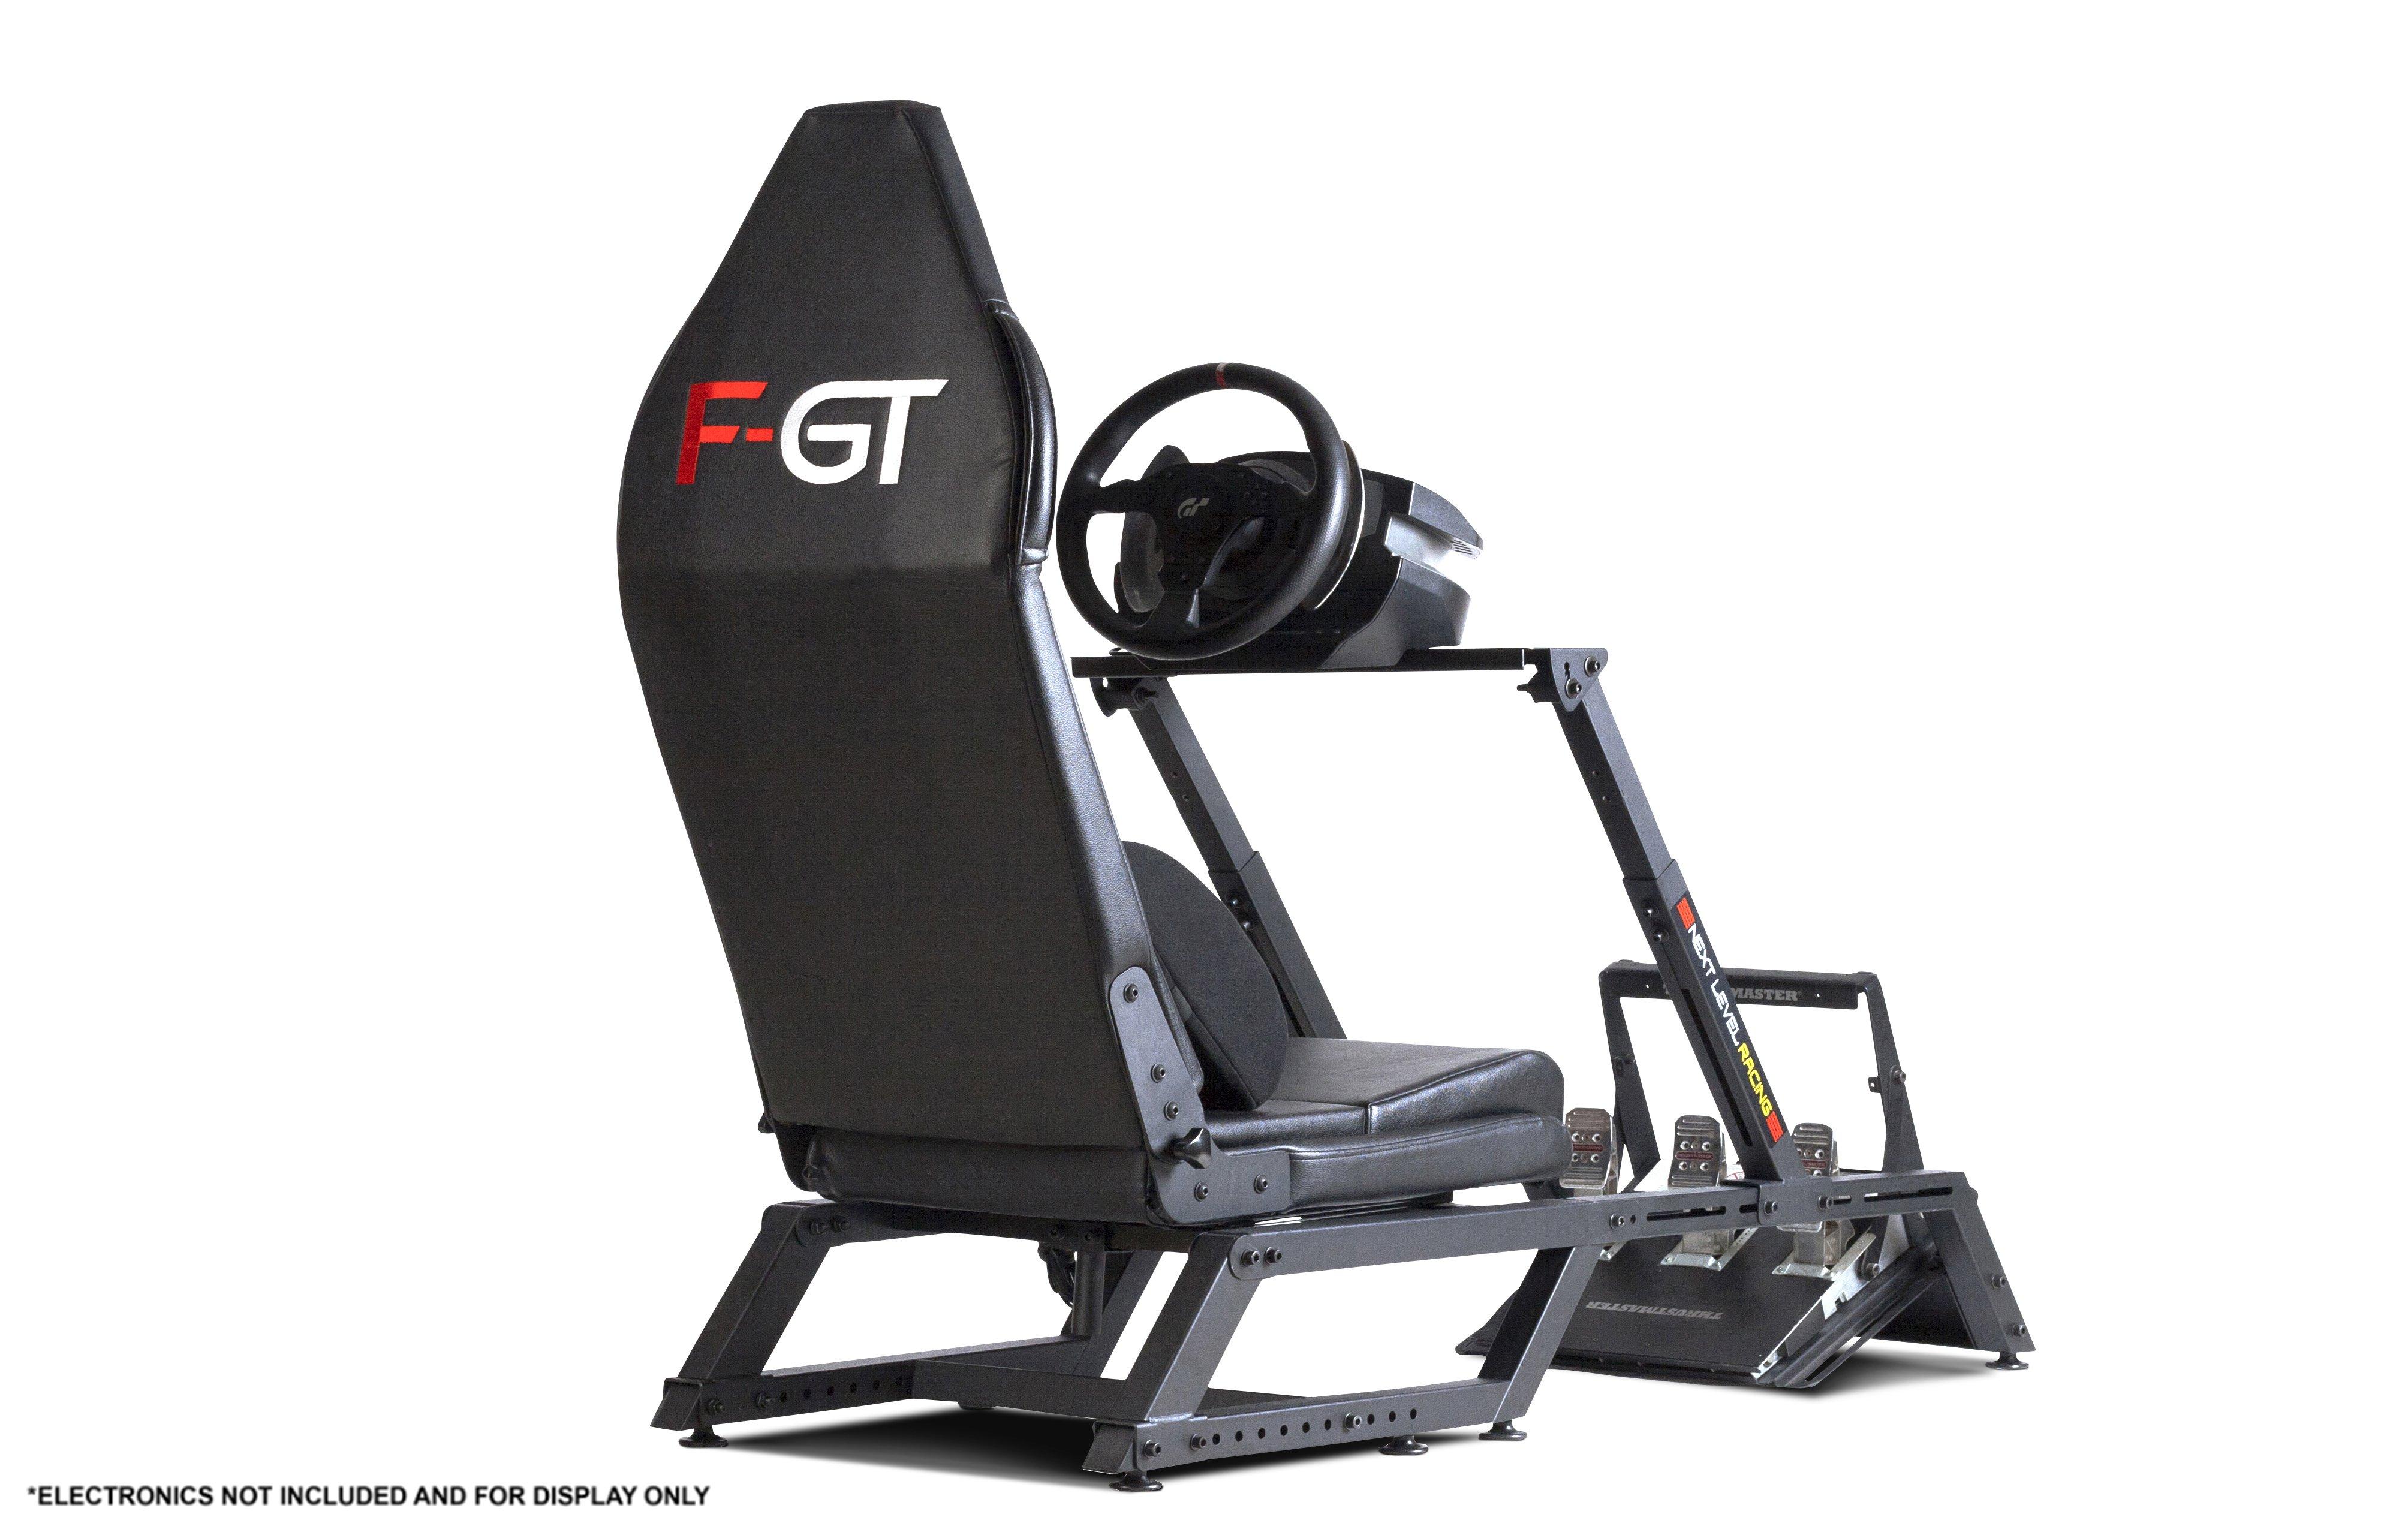 Flex On Forza Peasants With This $153,000 F1 Racing Simulator